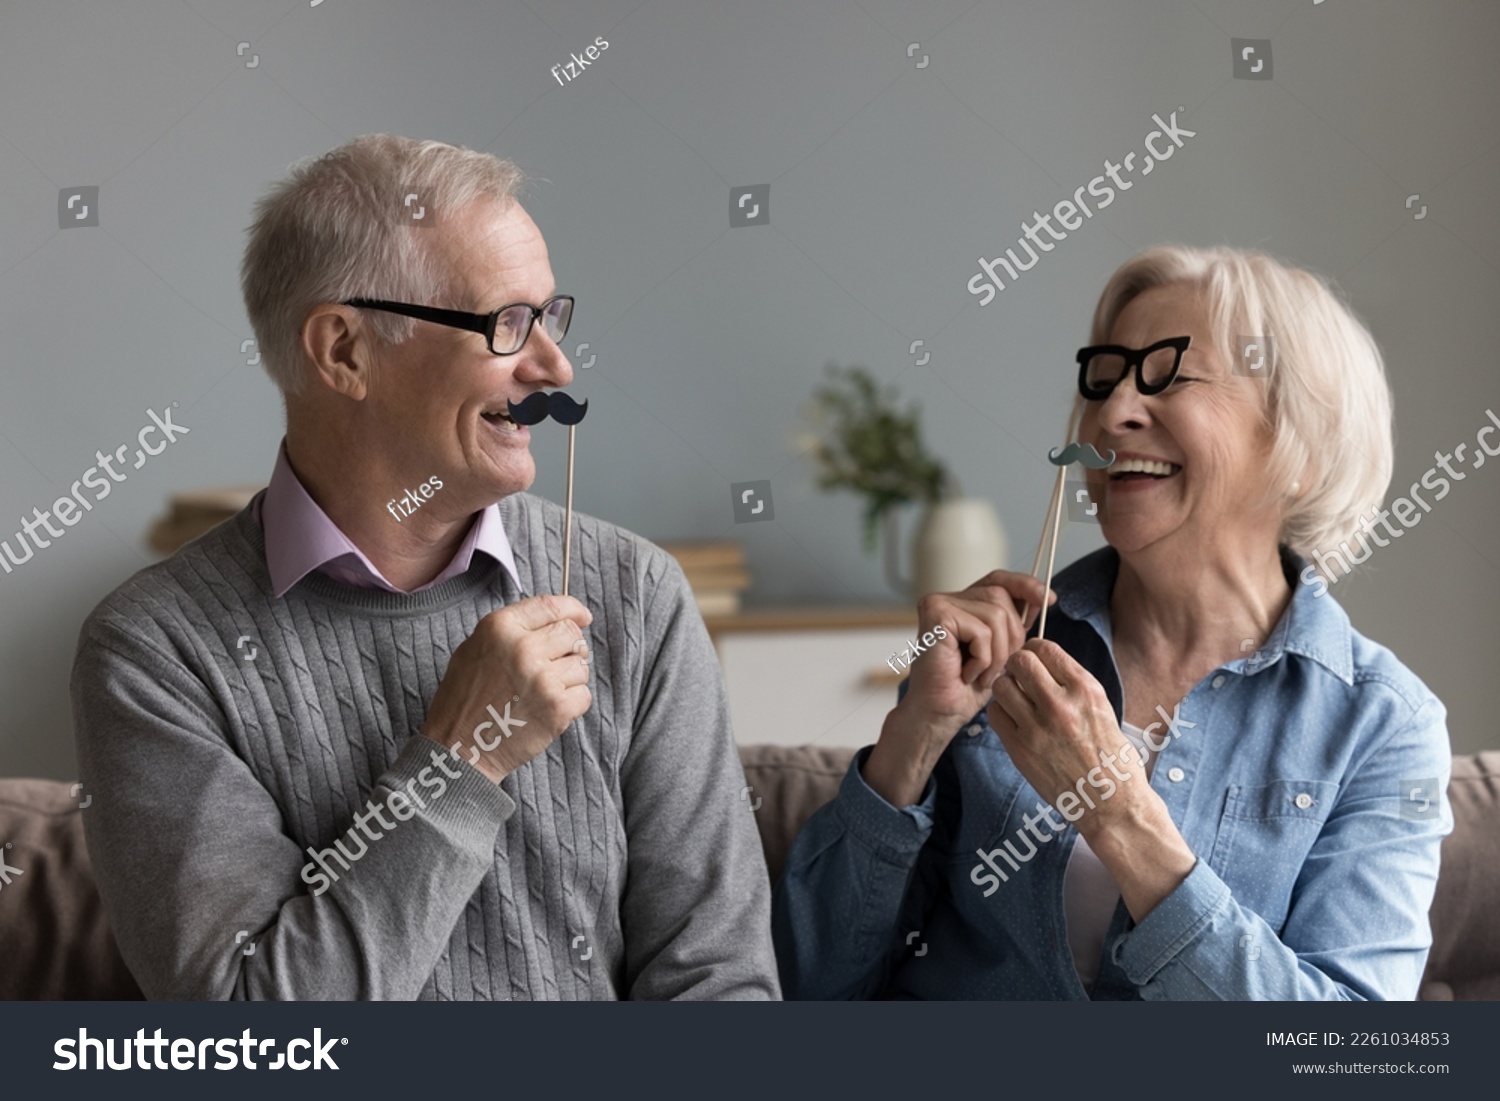 Happy joyful older couple of grandparents playing with photo shooting props, applying fake moustache and glasses on sticks to faces, having fun, smiling, laughing #2261034853